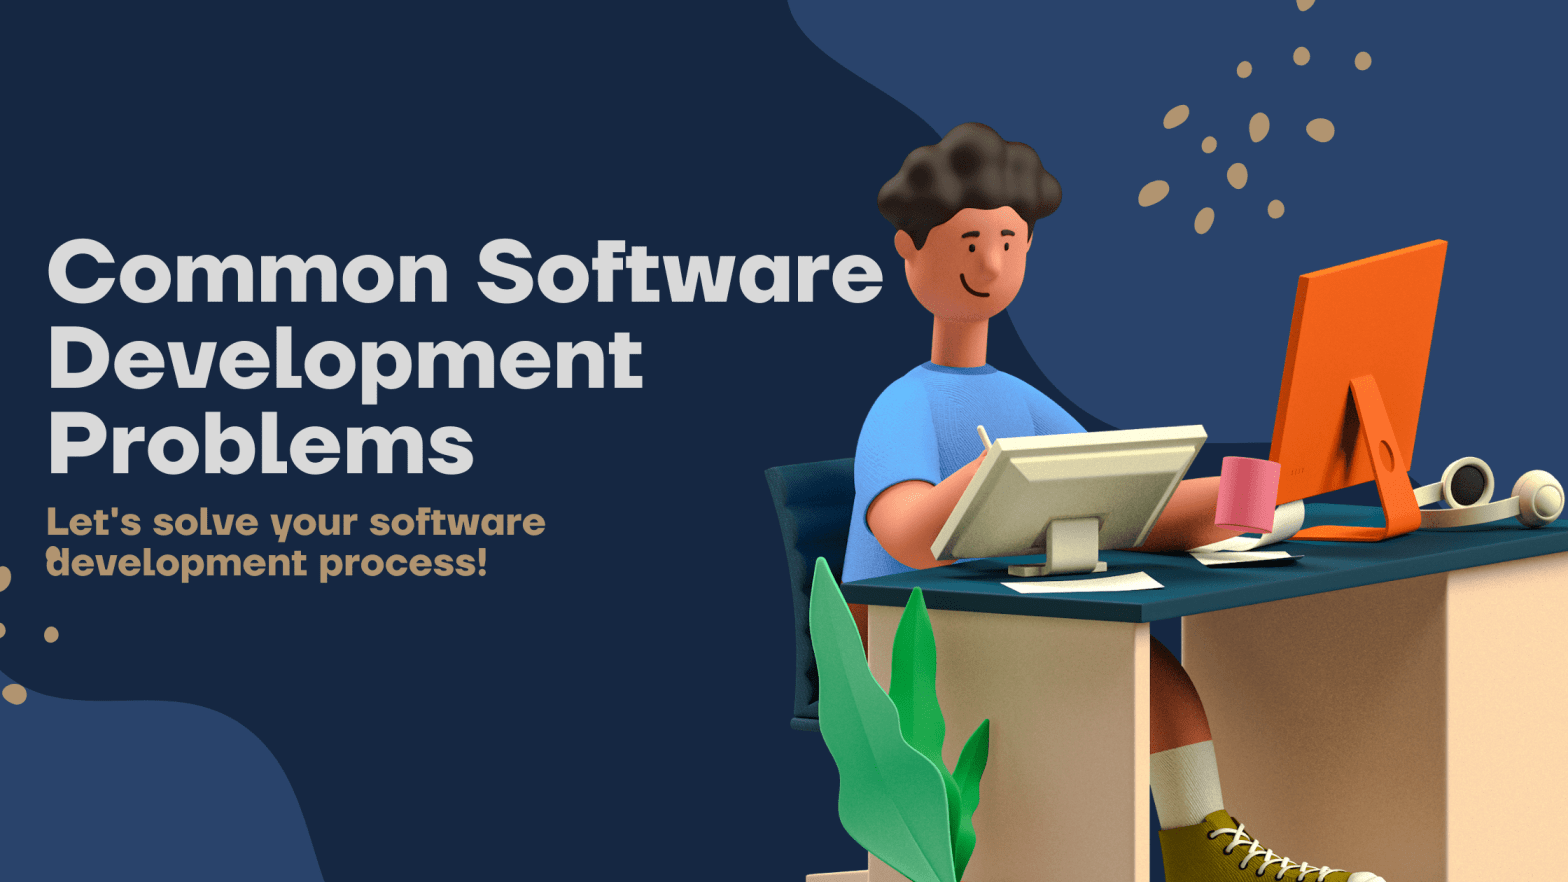 9 Common Software Development Problems and Solutions